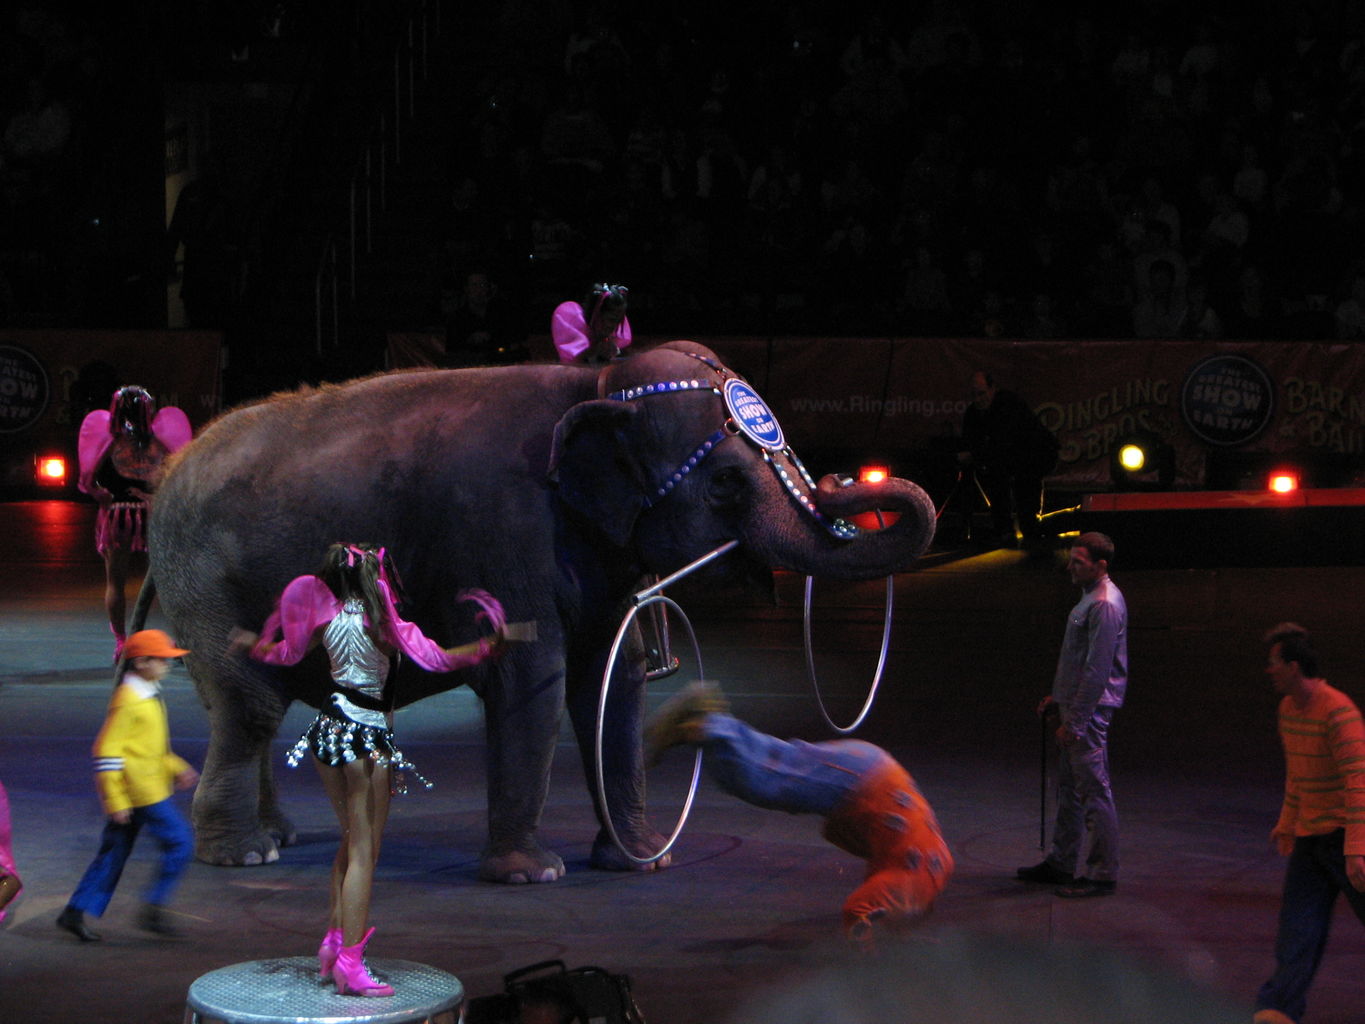 James goes to the Circus